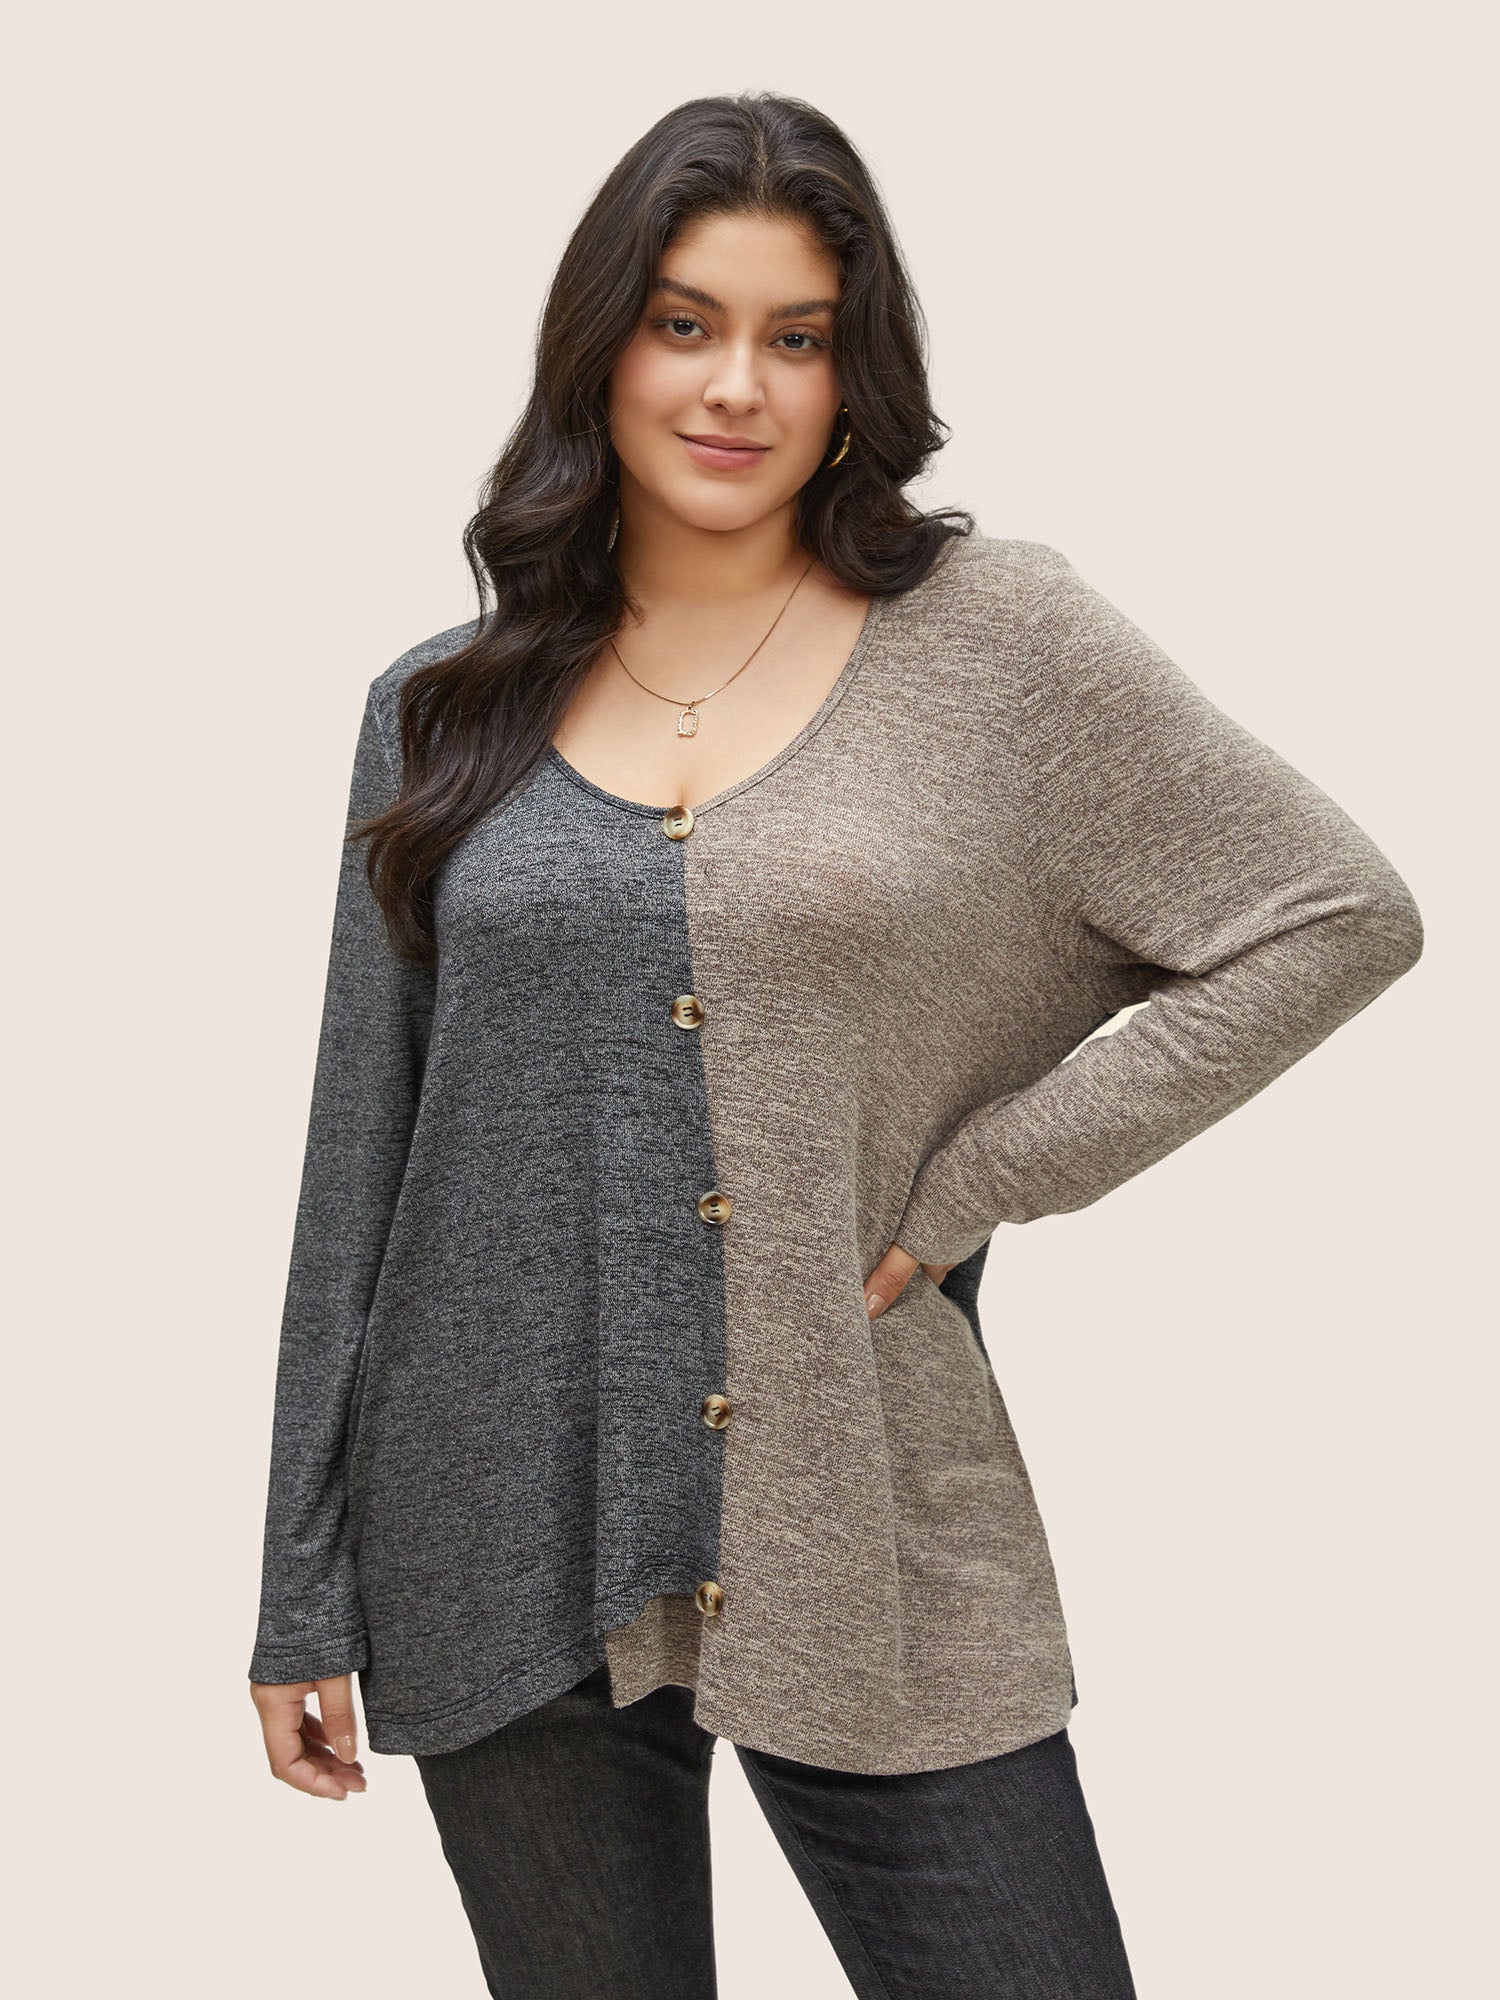 

Plus Size Women Everyday Plain Contrast Regular Sleeve Long Sleeve V-neck Casual T-shirts BloomChic, Multicolor